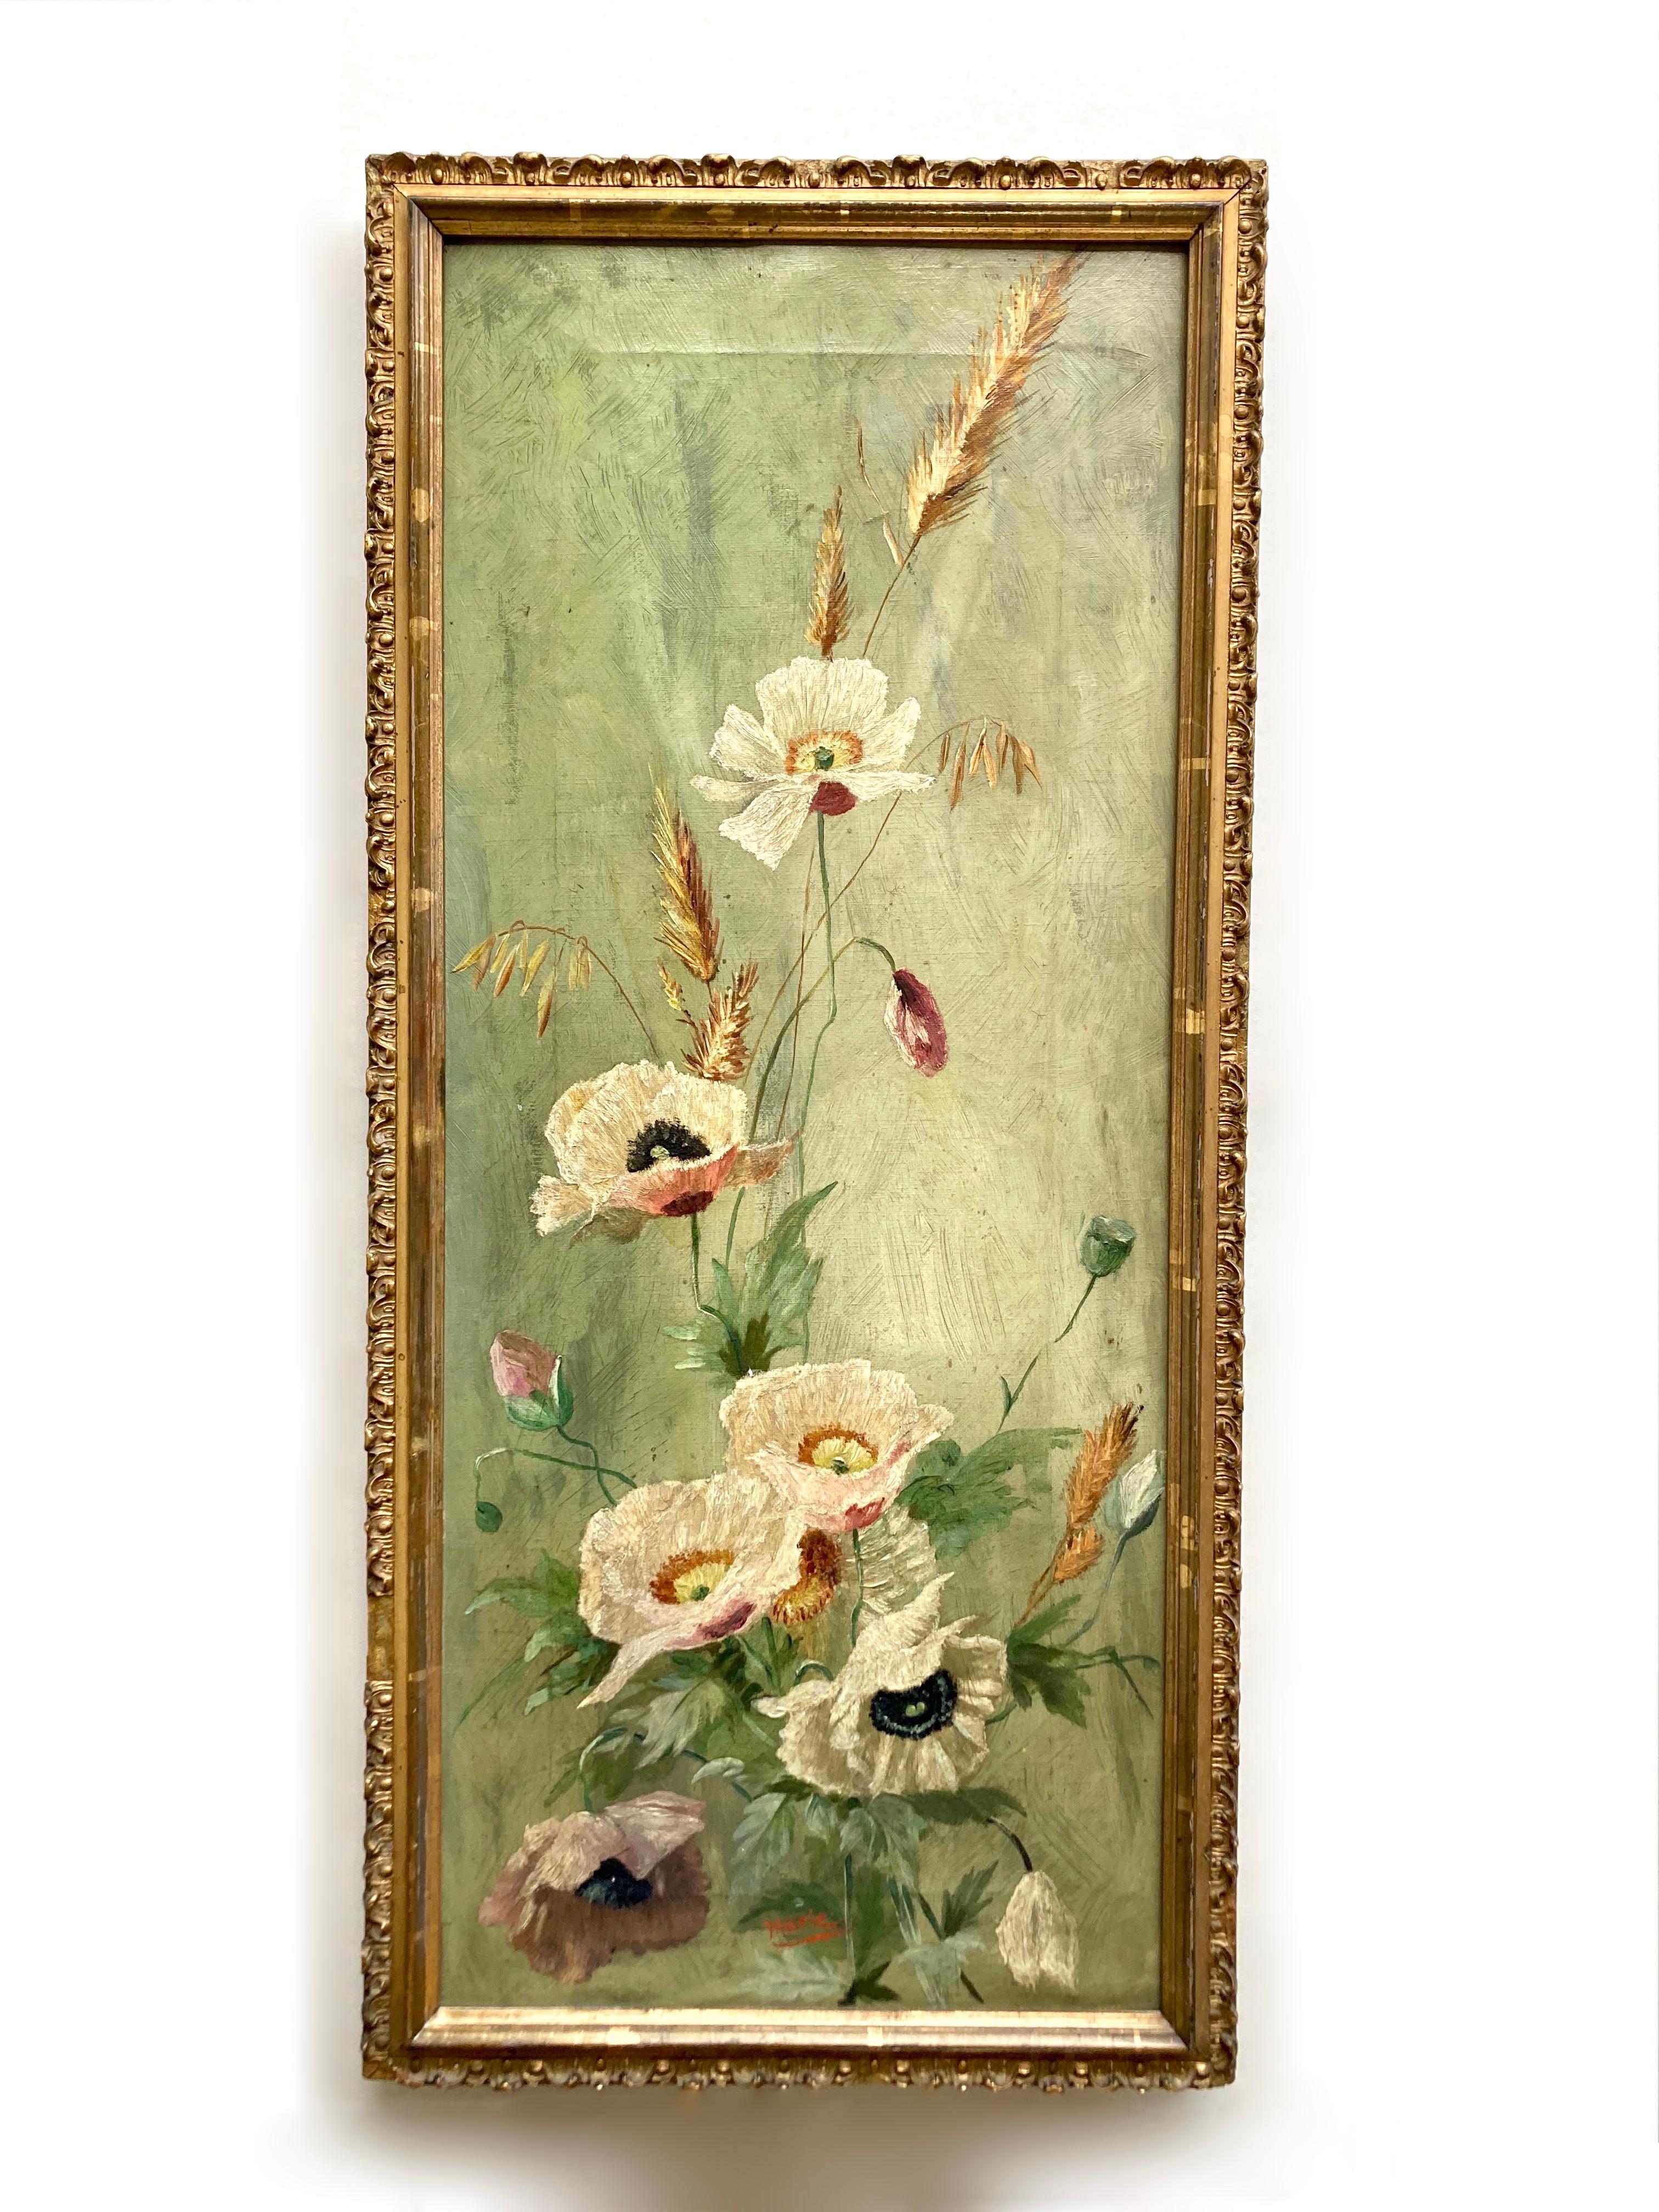 An original oil painting on stretched canvas from la Belle-Epoque (1871-1912). An unusual vertical format and a lovely floral still-life of wildflowers make this antique French painting stand out. The painting is signed in red by the artist, Marie,